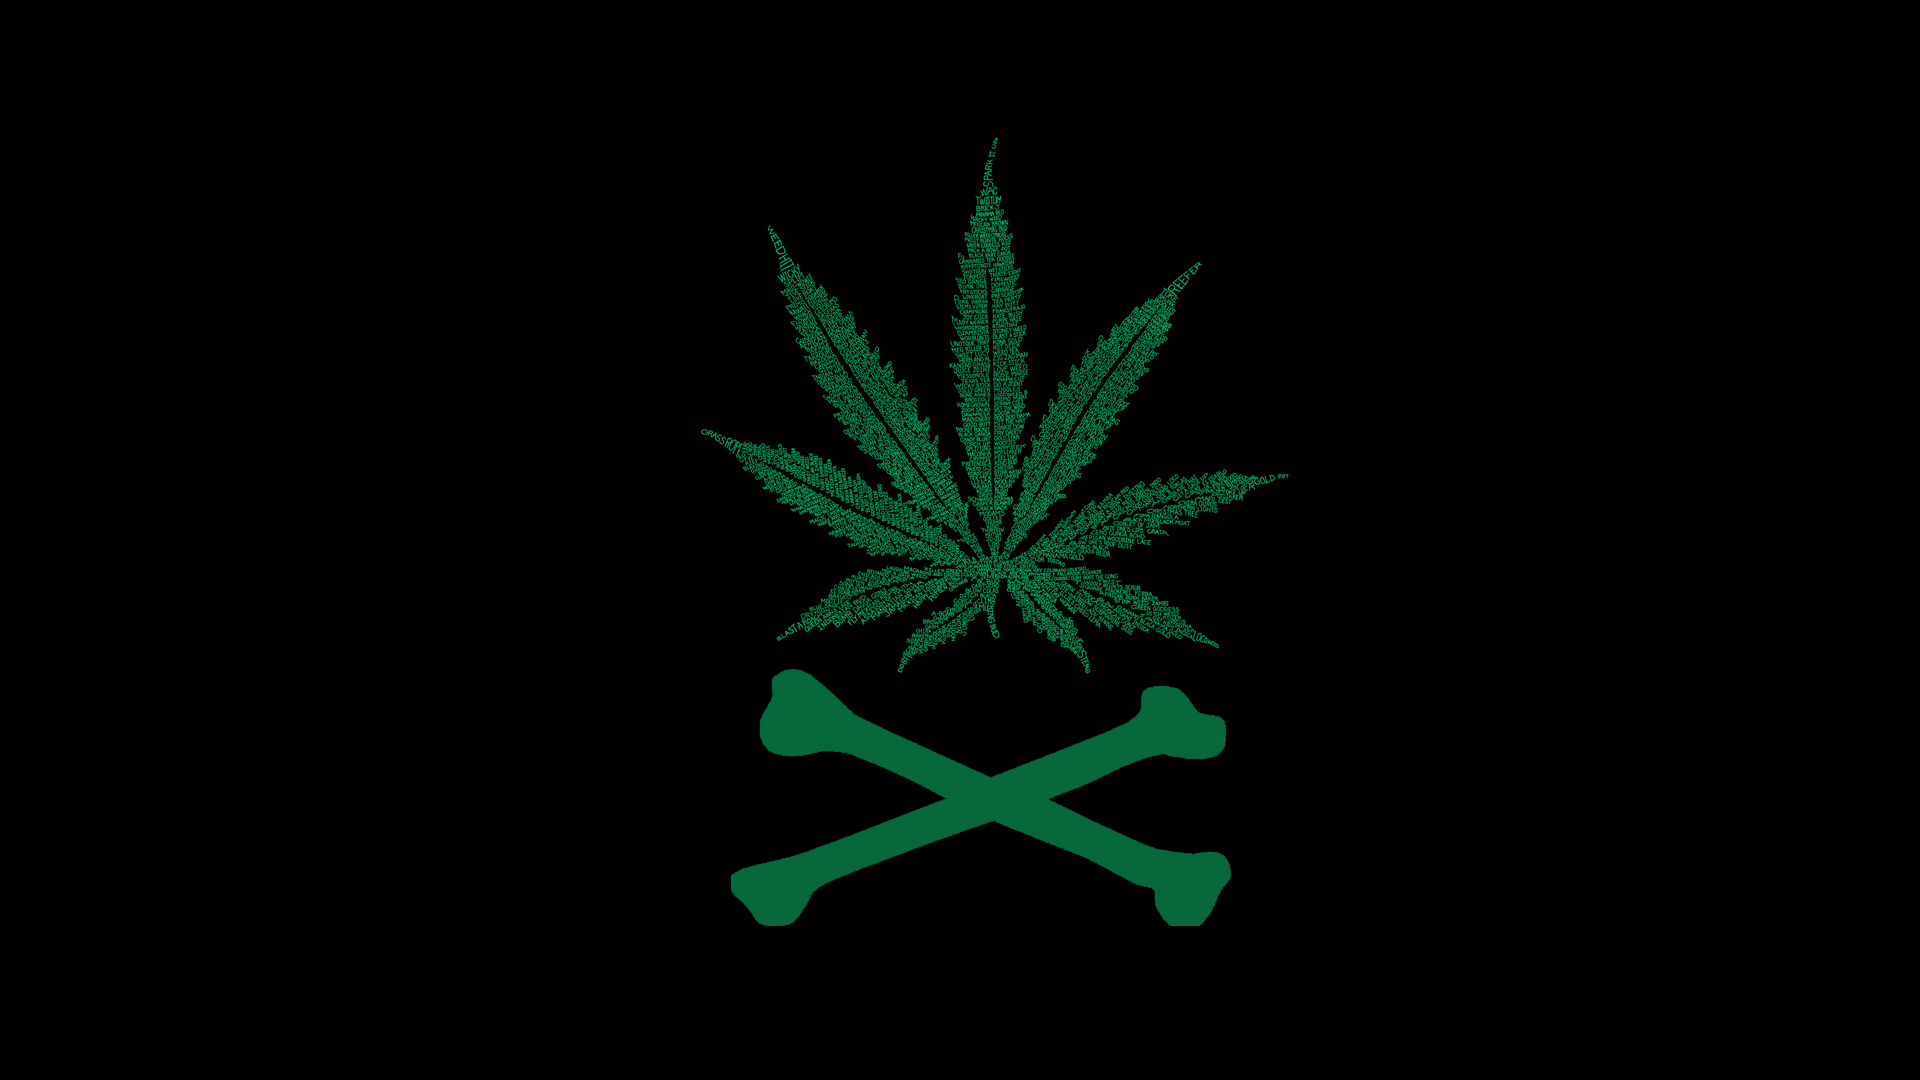 Weed Wallpaper Wide - Epic Wallpaperz